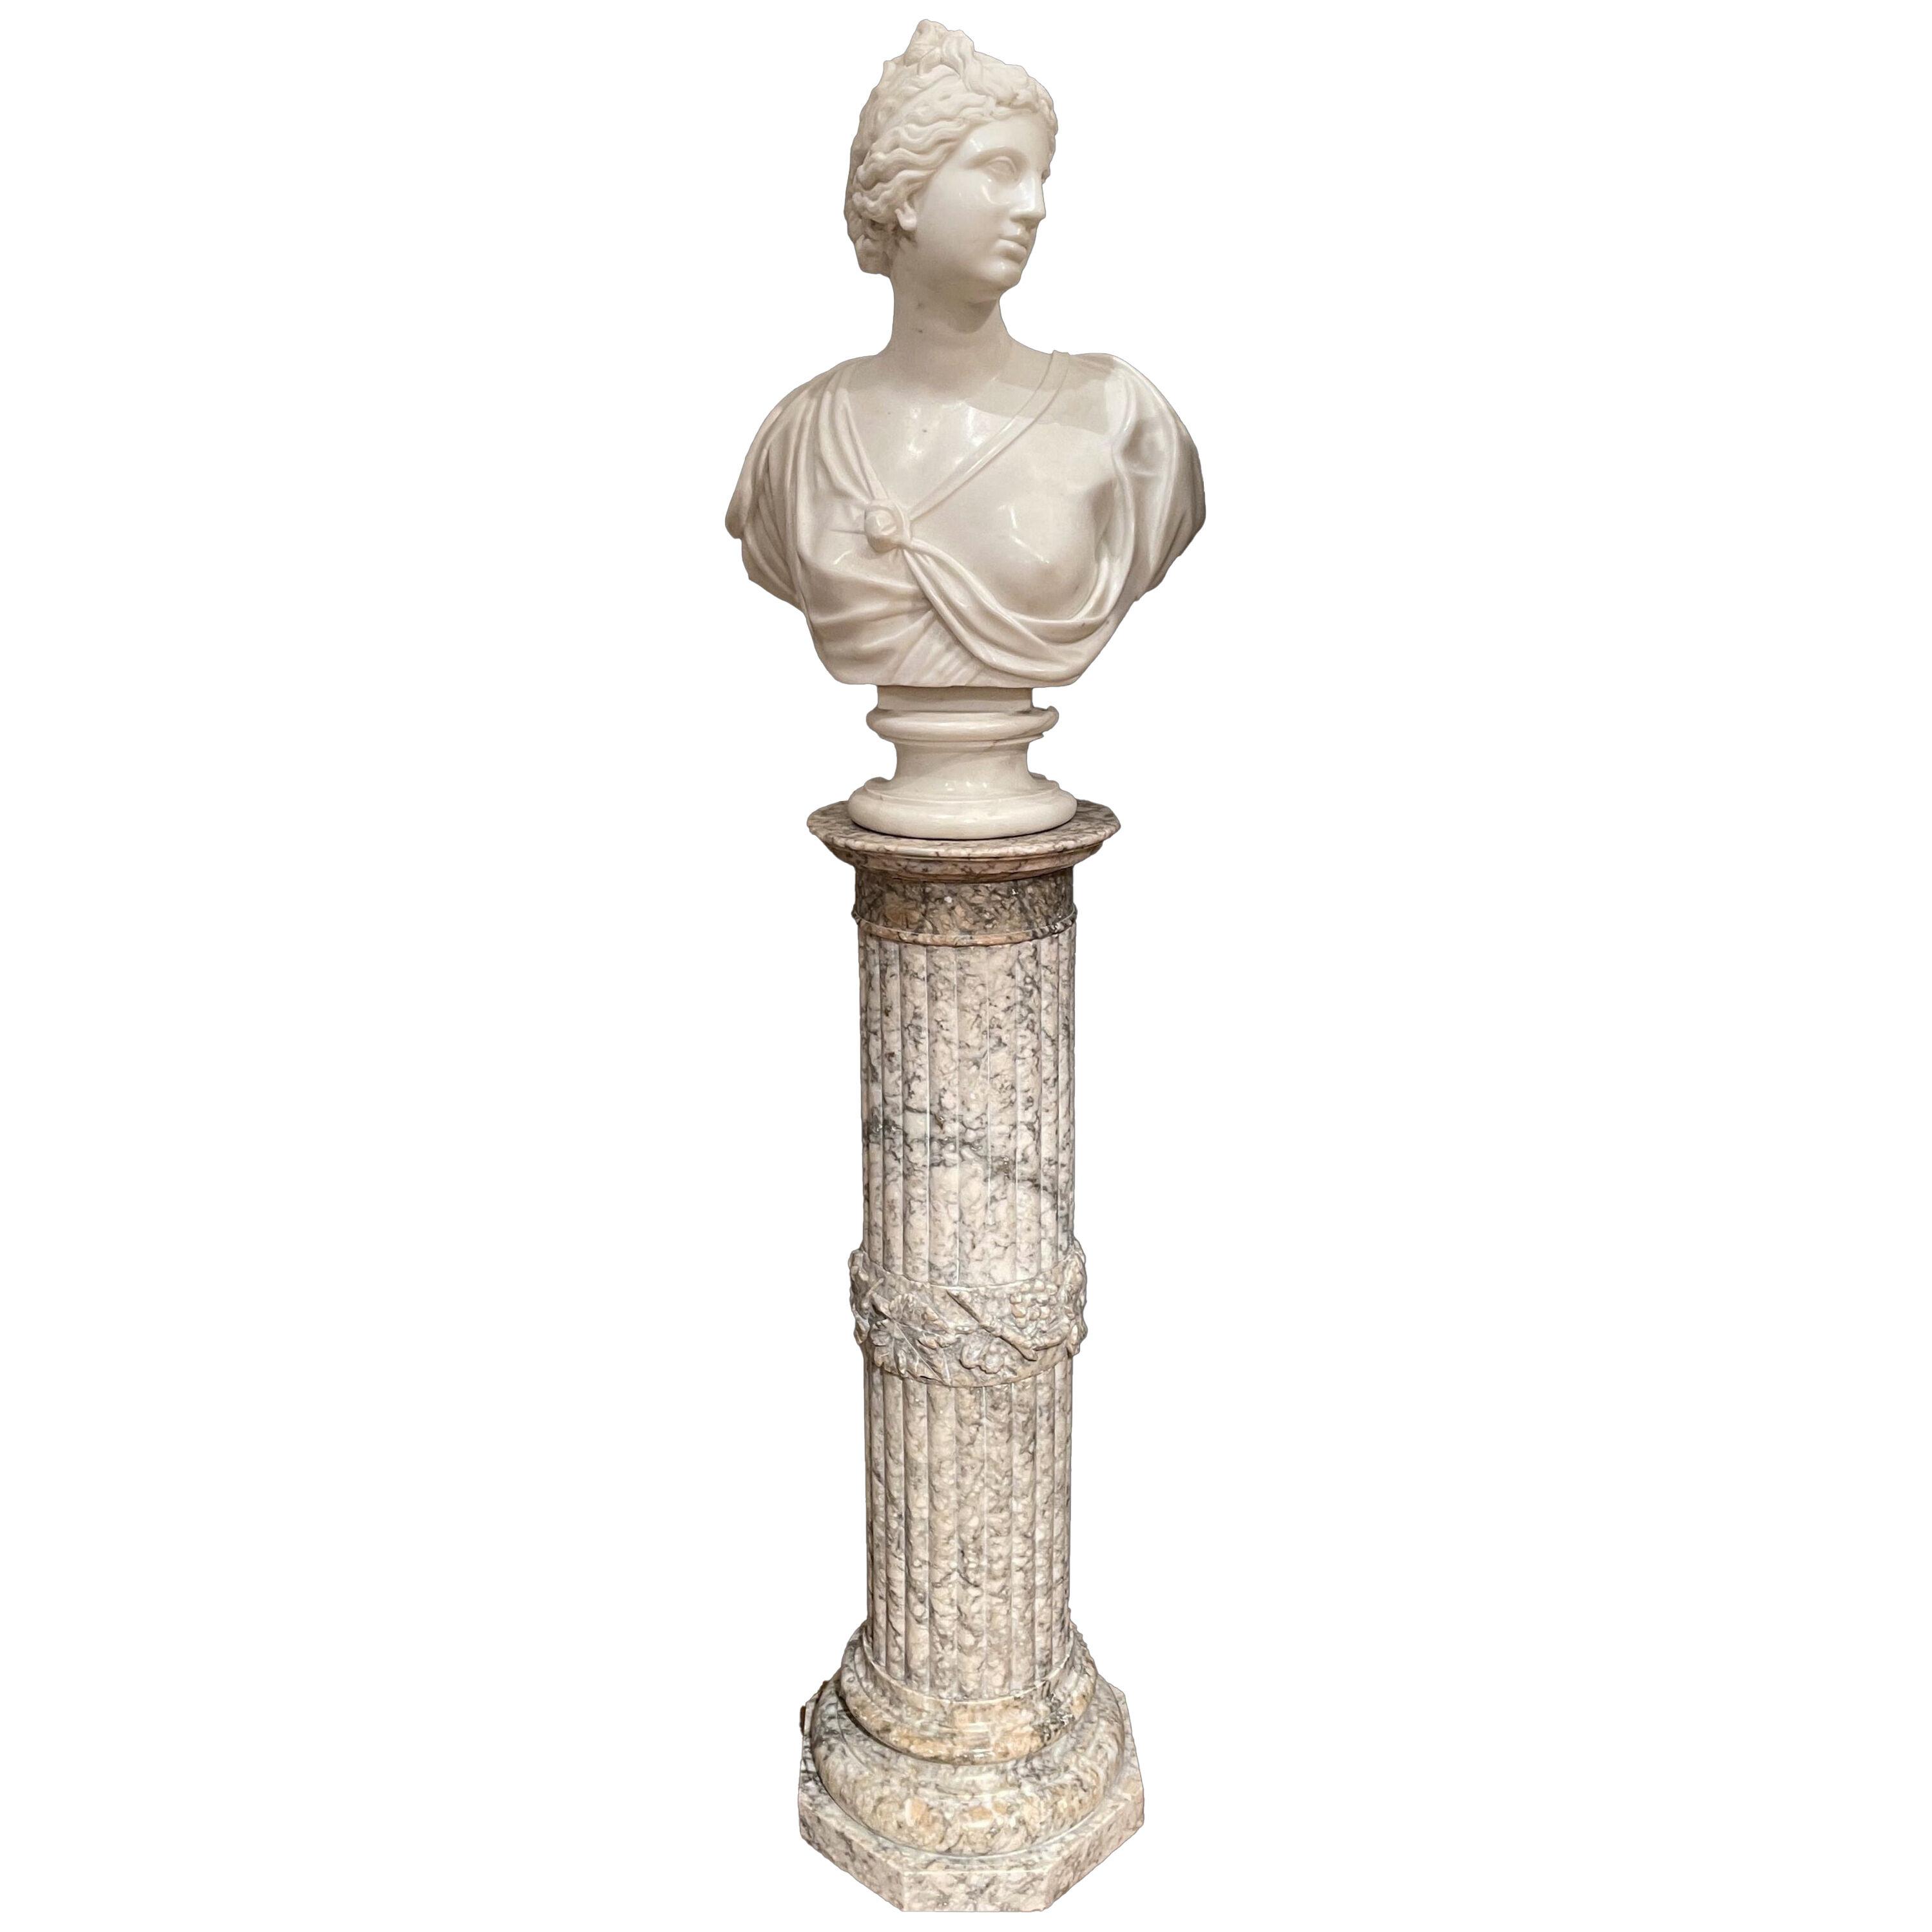 Antique Classical Marble Bust of Venus on a Pedestal